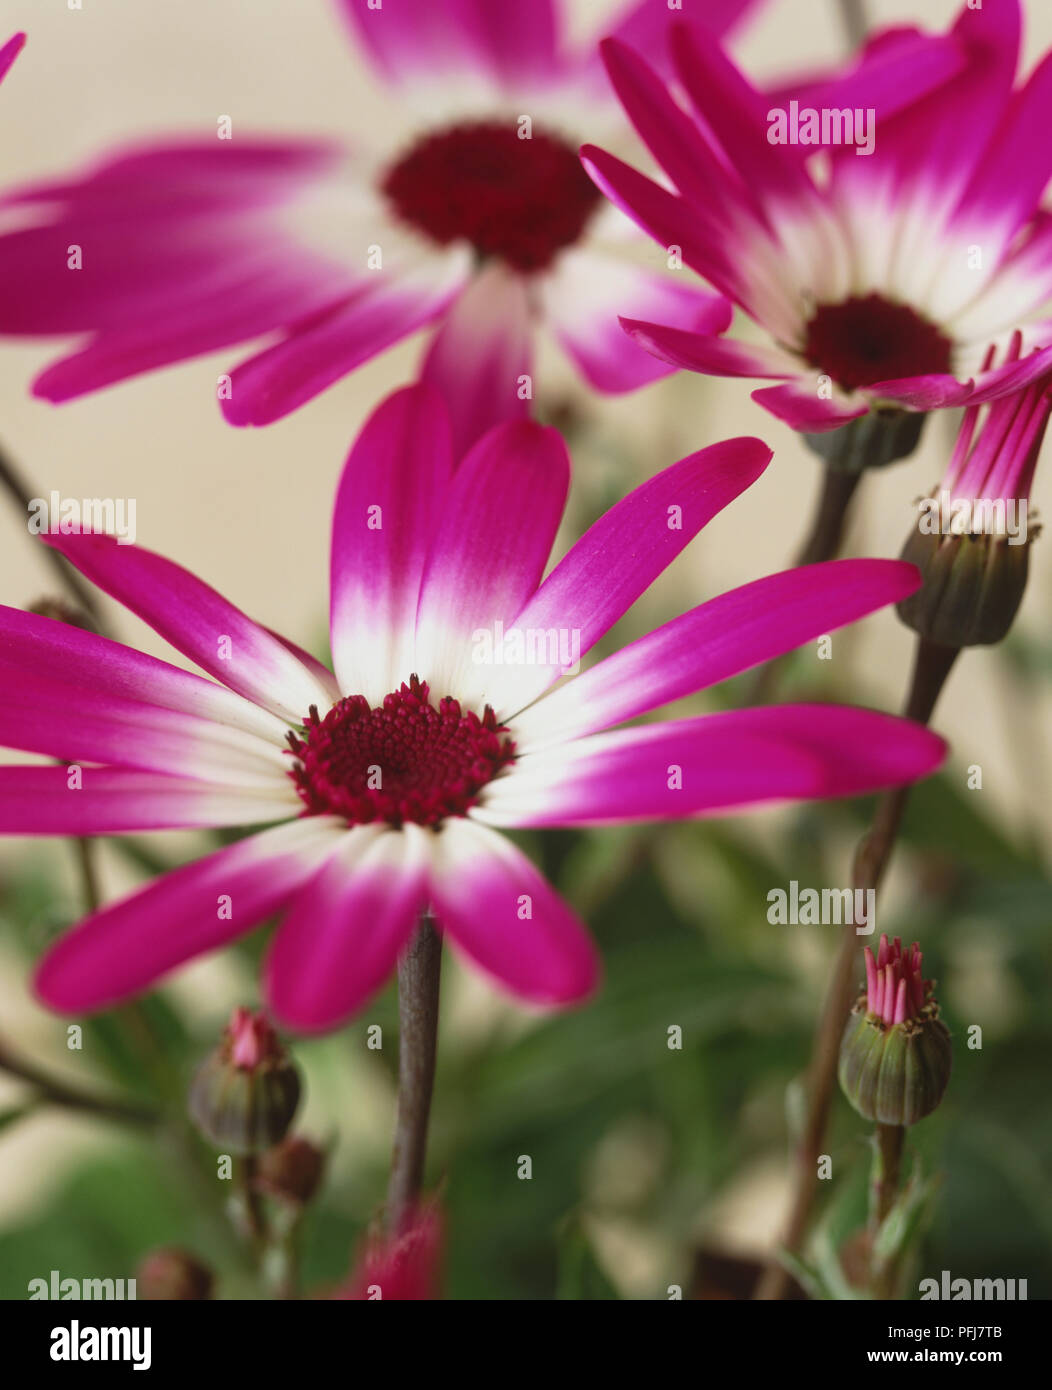 Florists' Cineraria (Pericallis hybrida), flowers, fully open, half open and closed, daisy-like petals, purple turning white towards center, close-up Stock Photo